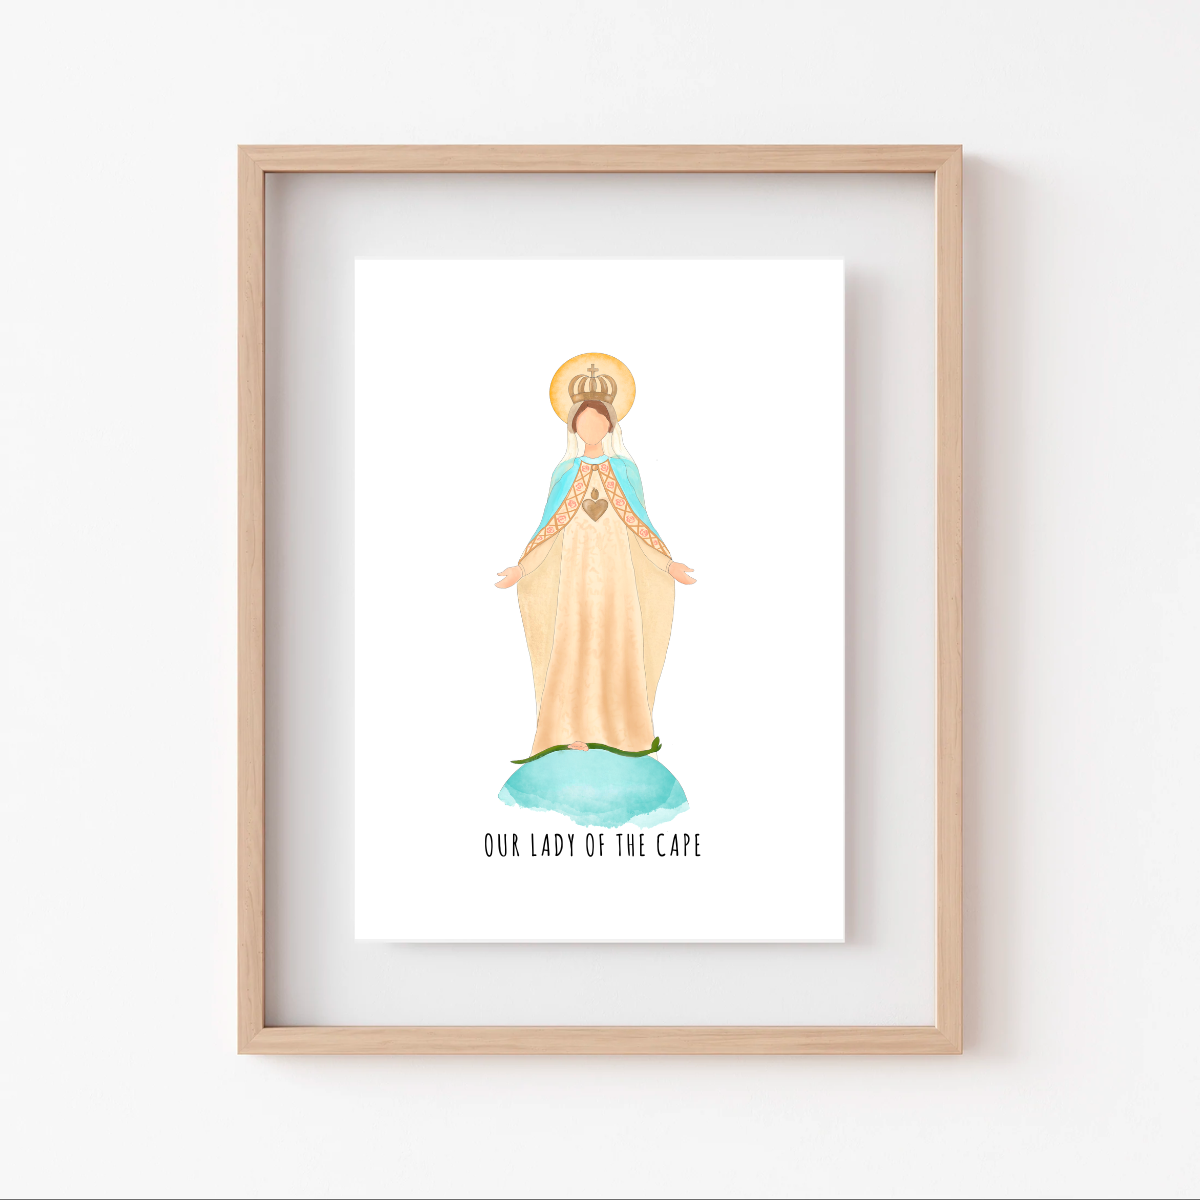 Marian Minis - Our Lady of the Cape